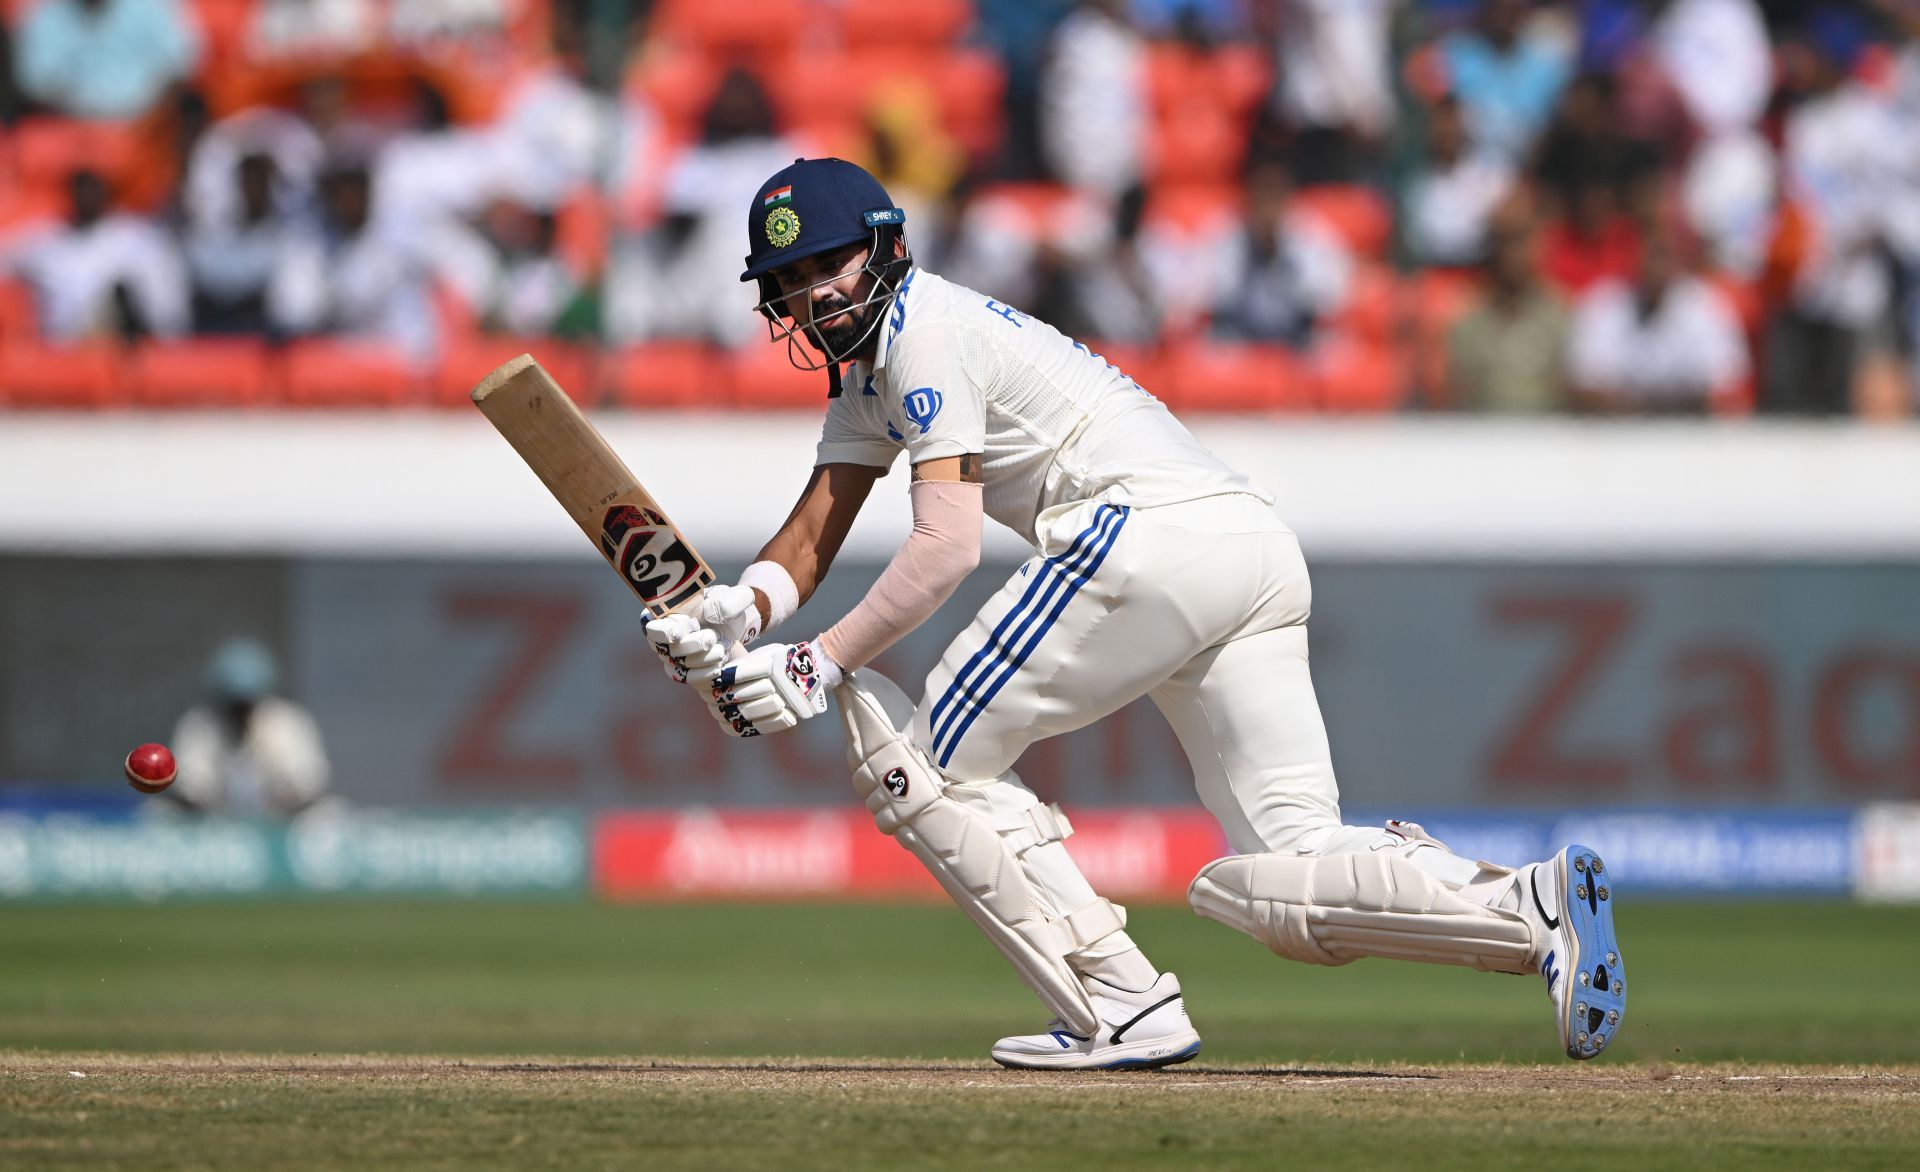 KL Rahul was ruled out of the second Test due to pain in his right quadriceps. [P/C: Getty]